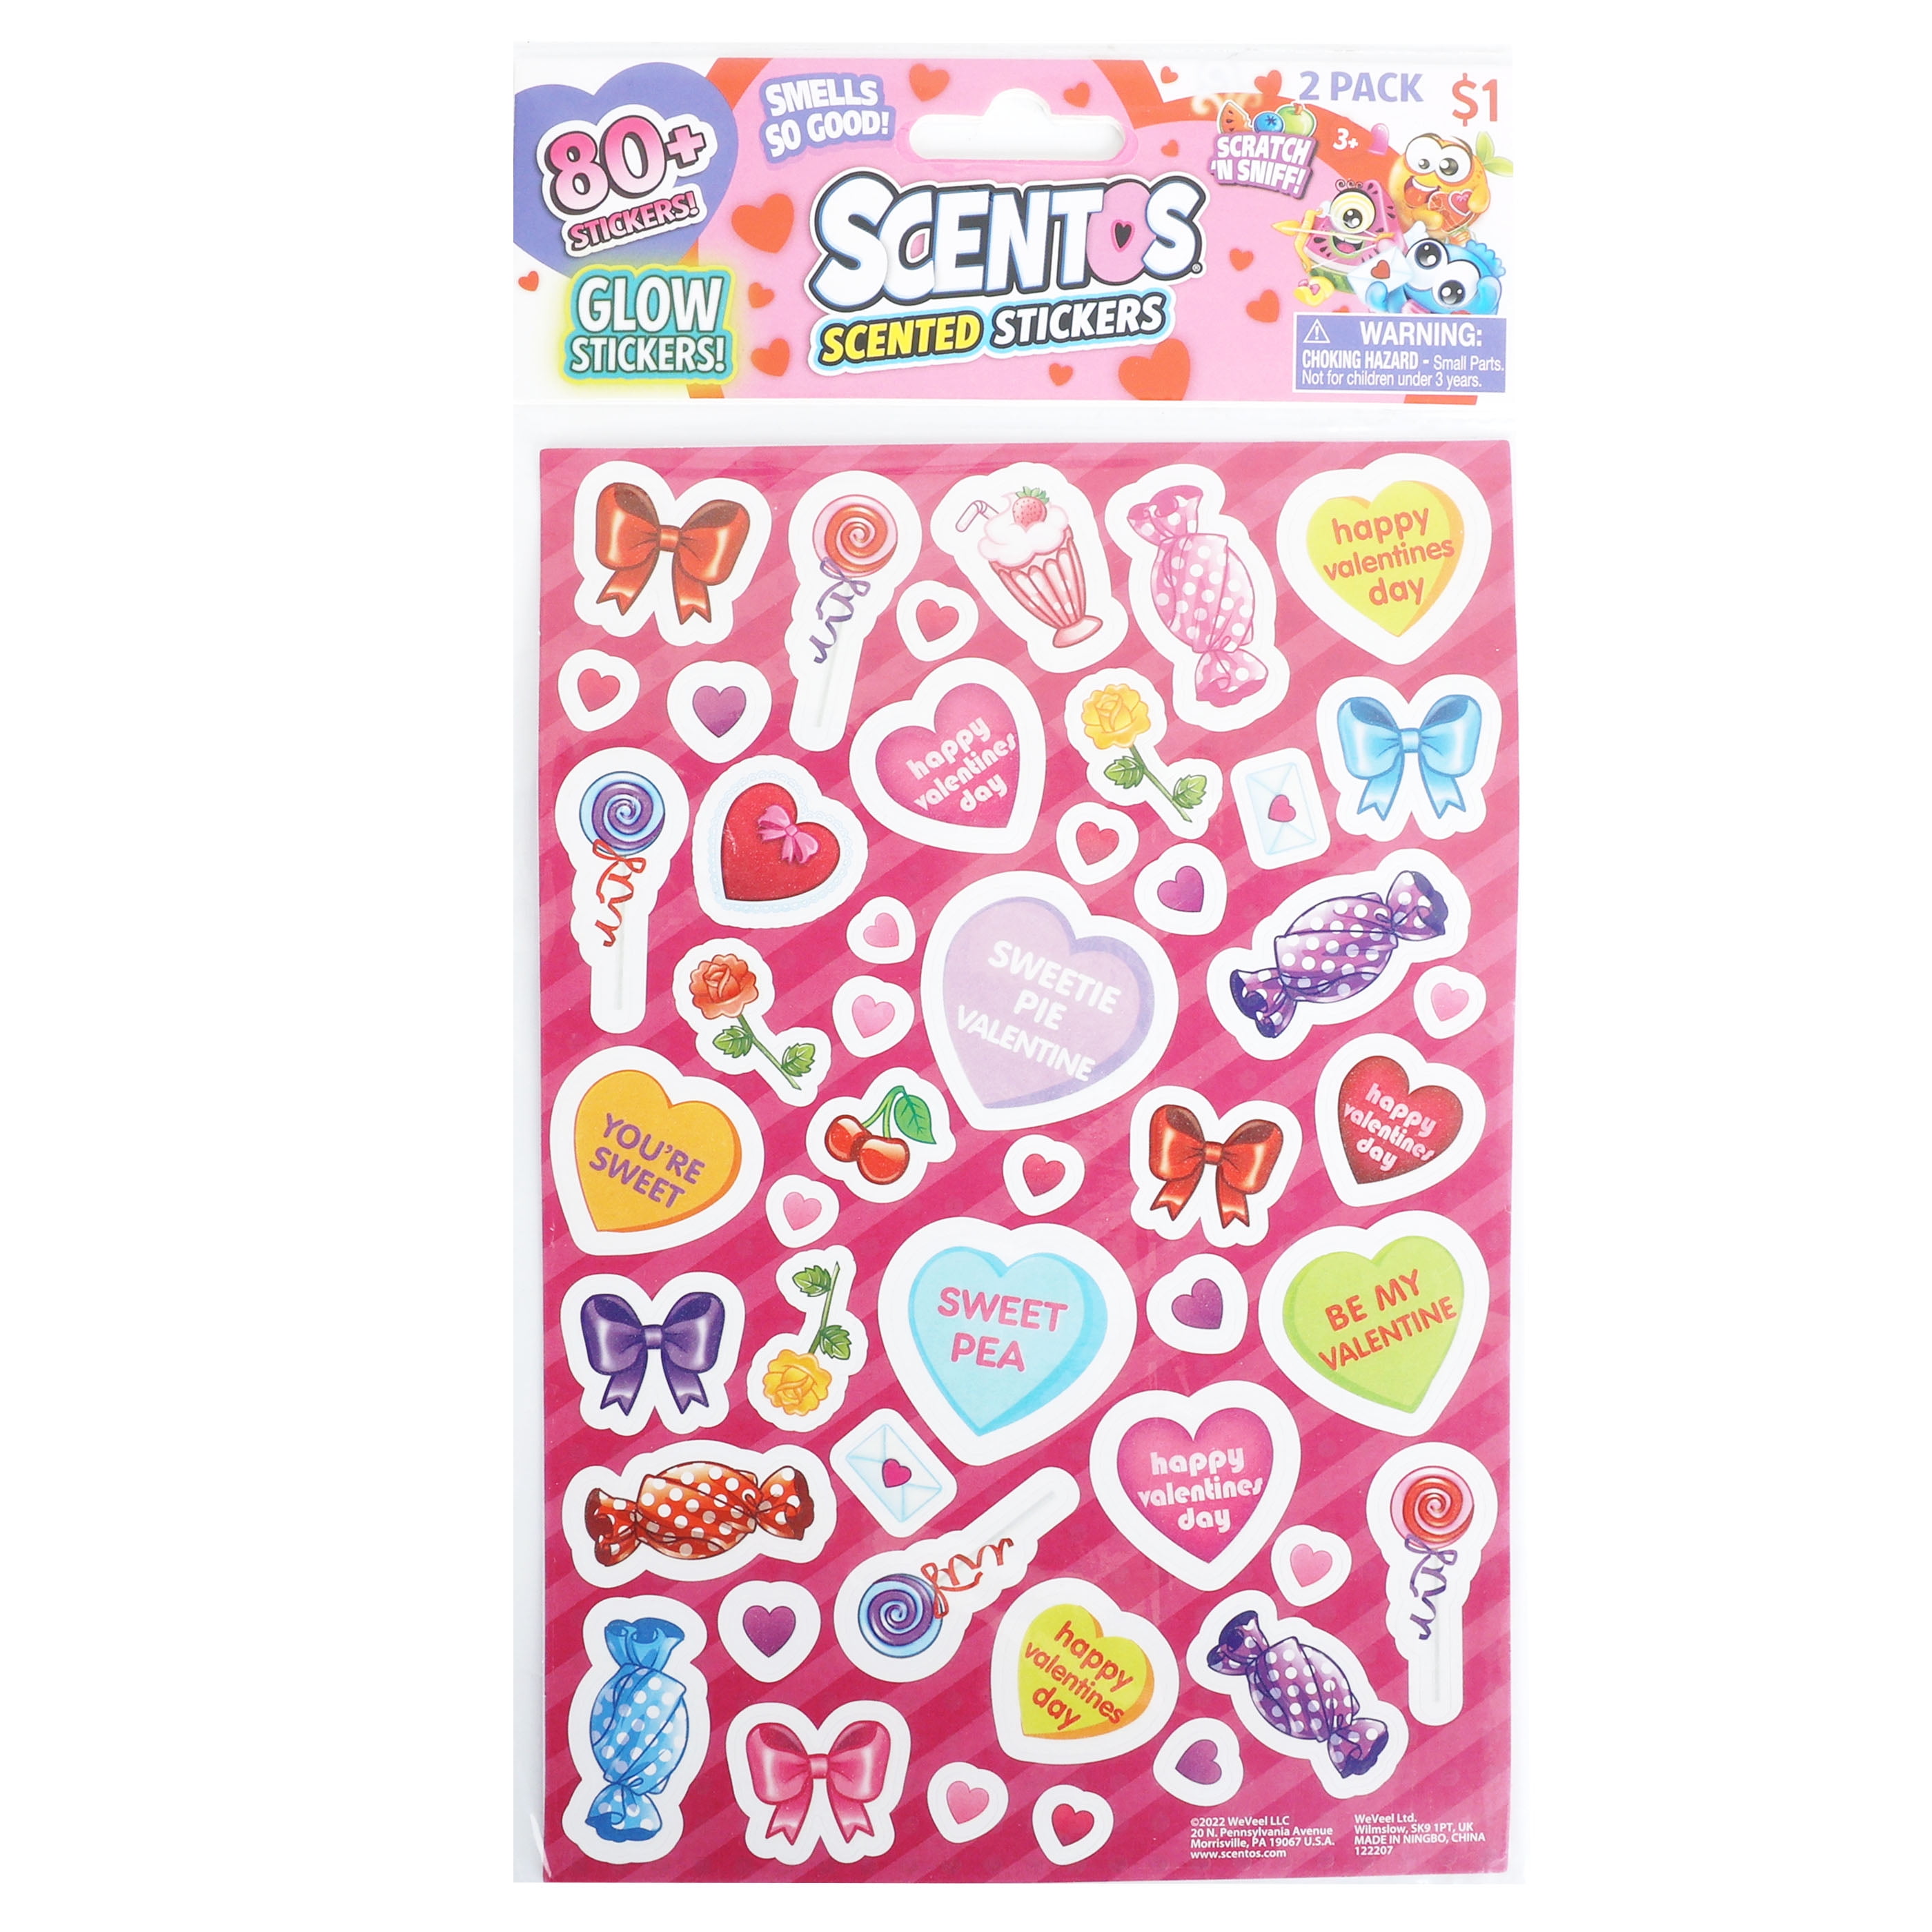 Scentos Valentine's Day 80+ Scented Glow in the Dark Stickers Pink - Ages 3+, Stationery